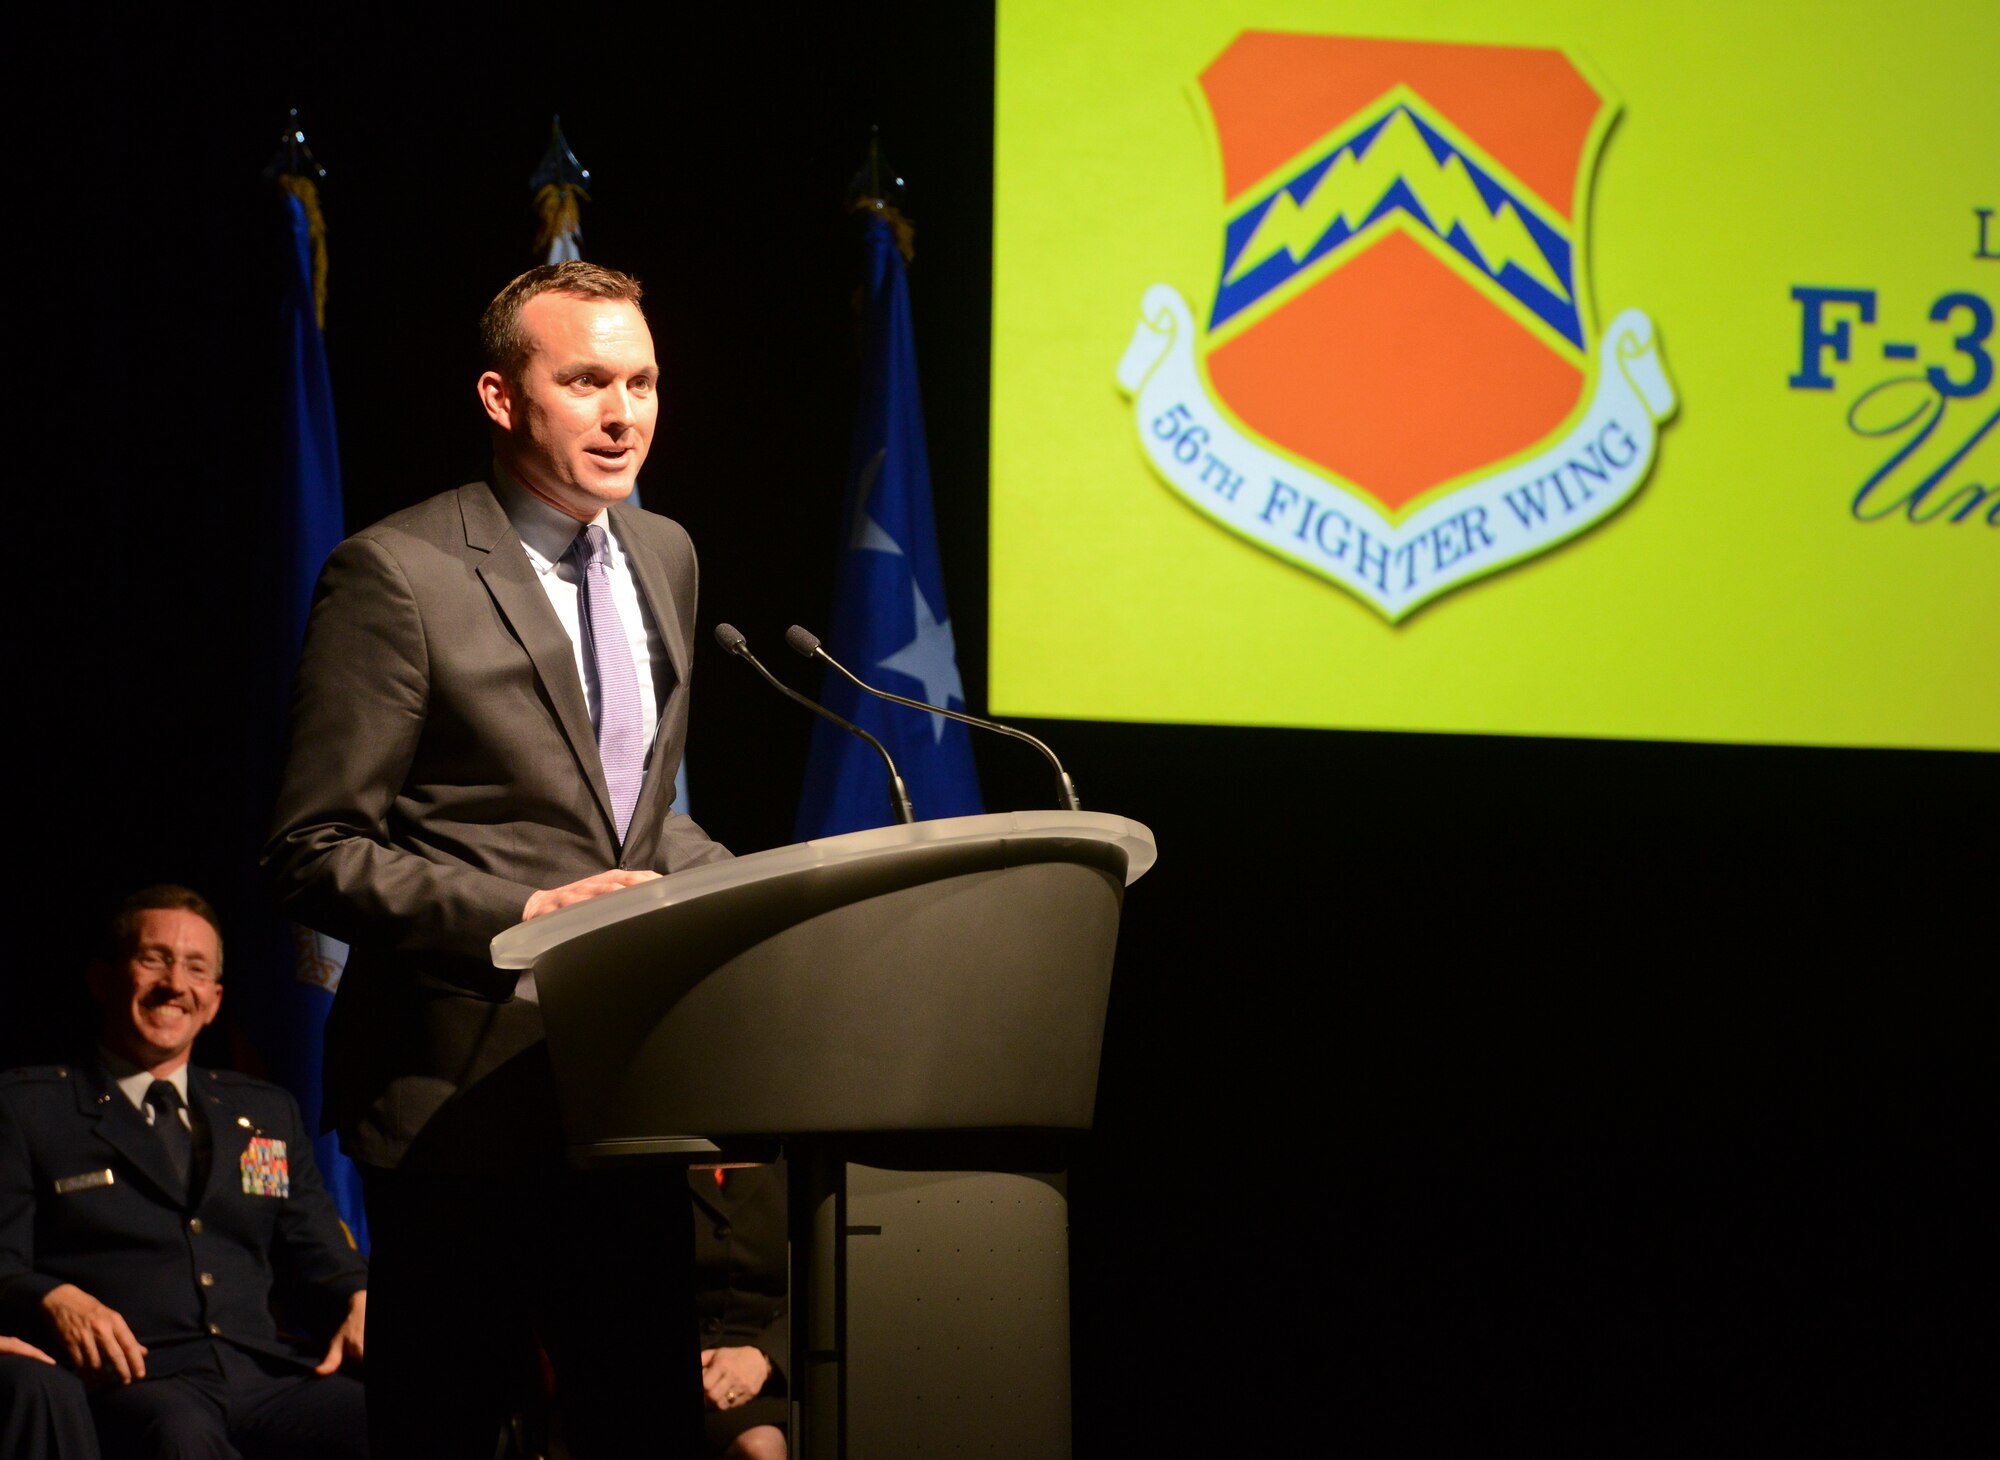 Undersecretary of the Air Force Eric Fanning addresses an audience of approximately 500 community leaders, elected officials, representatives from partner nation air forces and Luke Airmen during an unveiling ceremony on March 14 at Luke Air Force Base for the 56th Fighter Wing’s first F-35 Lightning II fighter jet. On the stage in the background is Brig. Gen. Mike Rothstein, 56th Fighter Wing commander. “Today's ceremony embodies, to me, commitment,” Fanning said. “For the Air Force it represents our commitment to the F-35. This weapons system is critical for the Air Force continuing to provide decisive air superiority around the world. This fighter will dominate anything else, anywhere in the world that any other country produces.” (U.S. Air Force photo by Senior Airman Devante Williams)